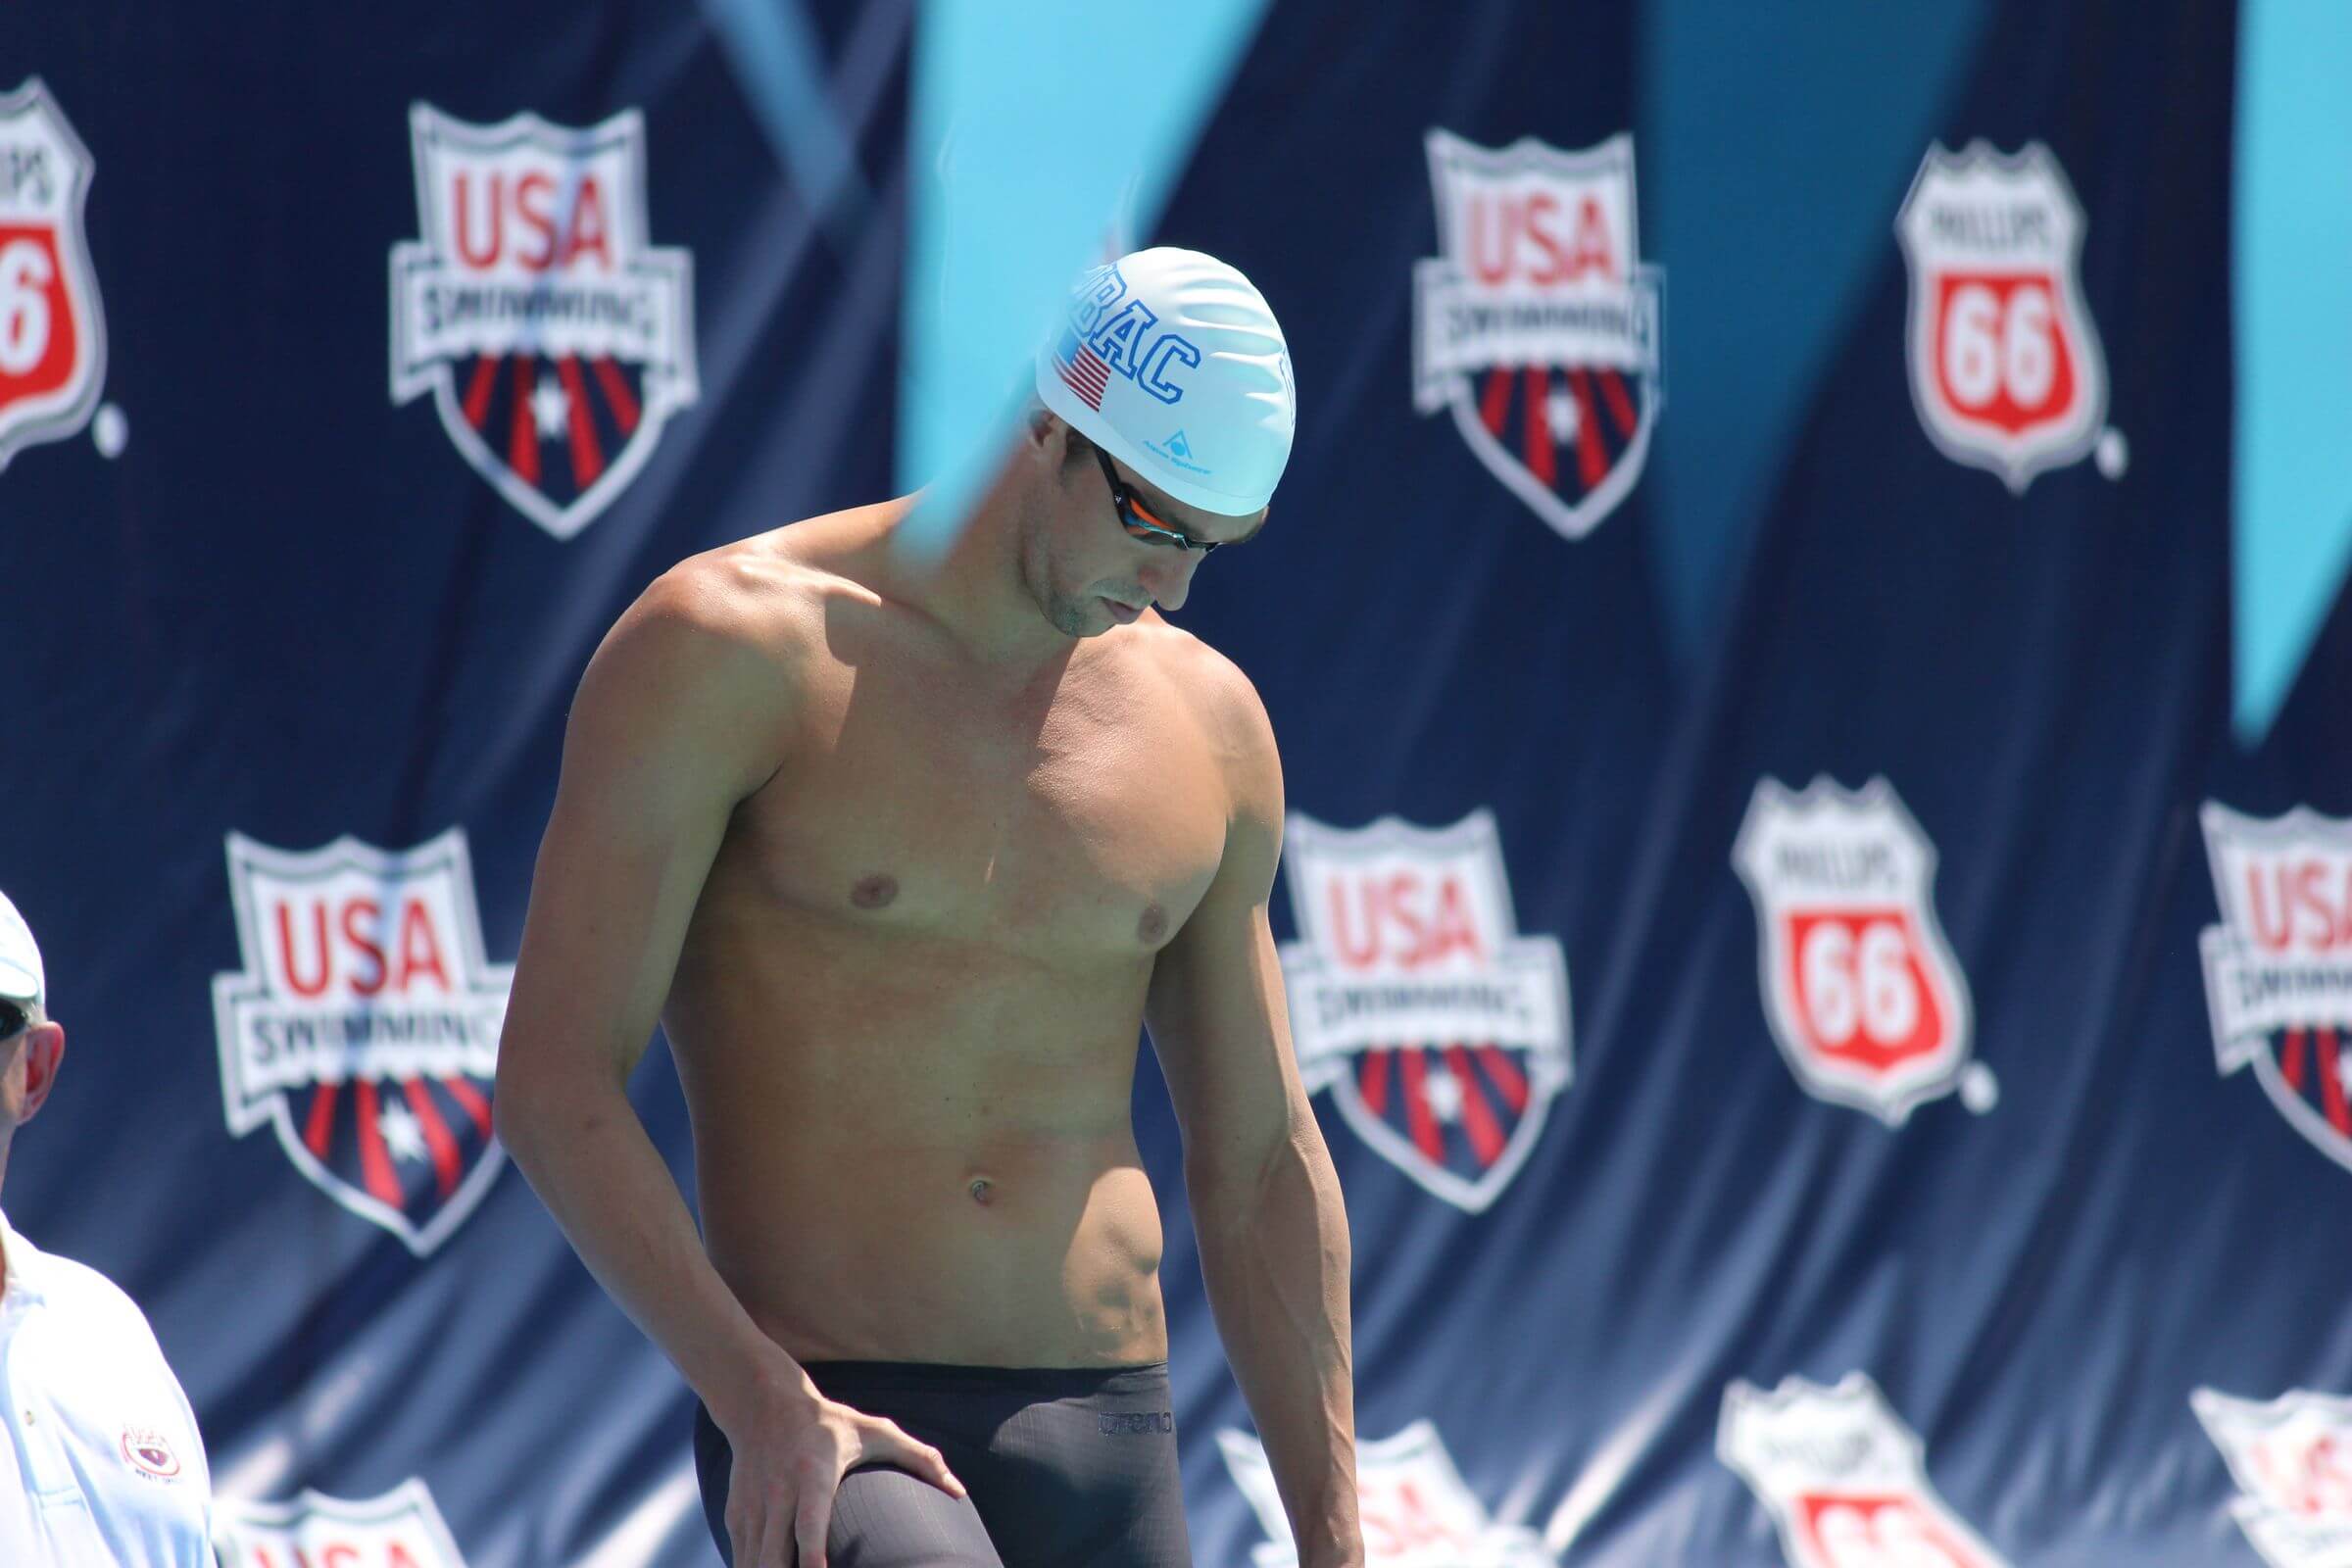 Video Interview Michael Phelps In Pole Position For 100 Fly Final